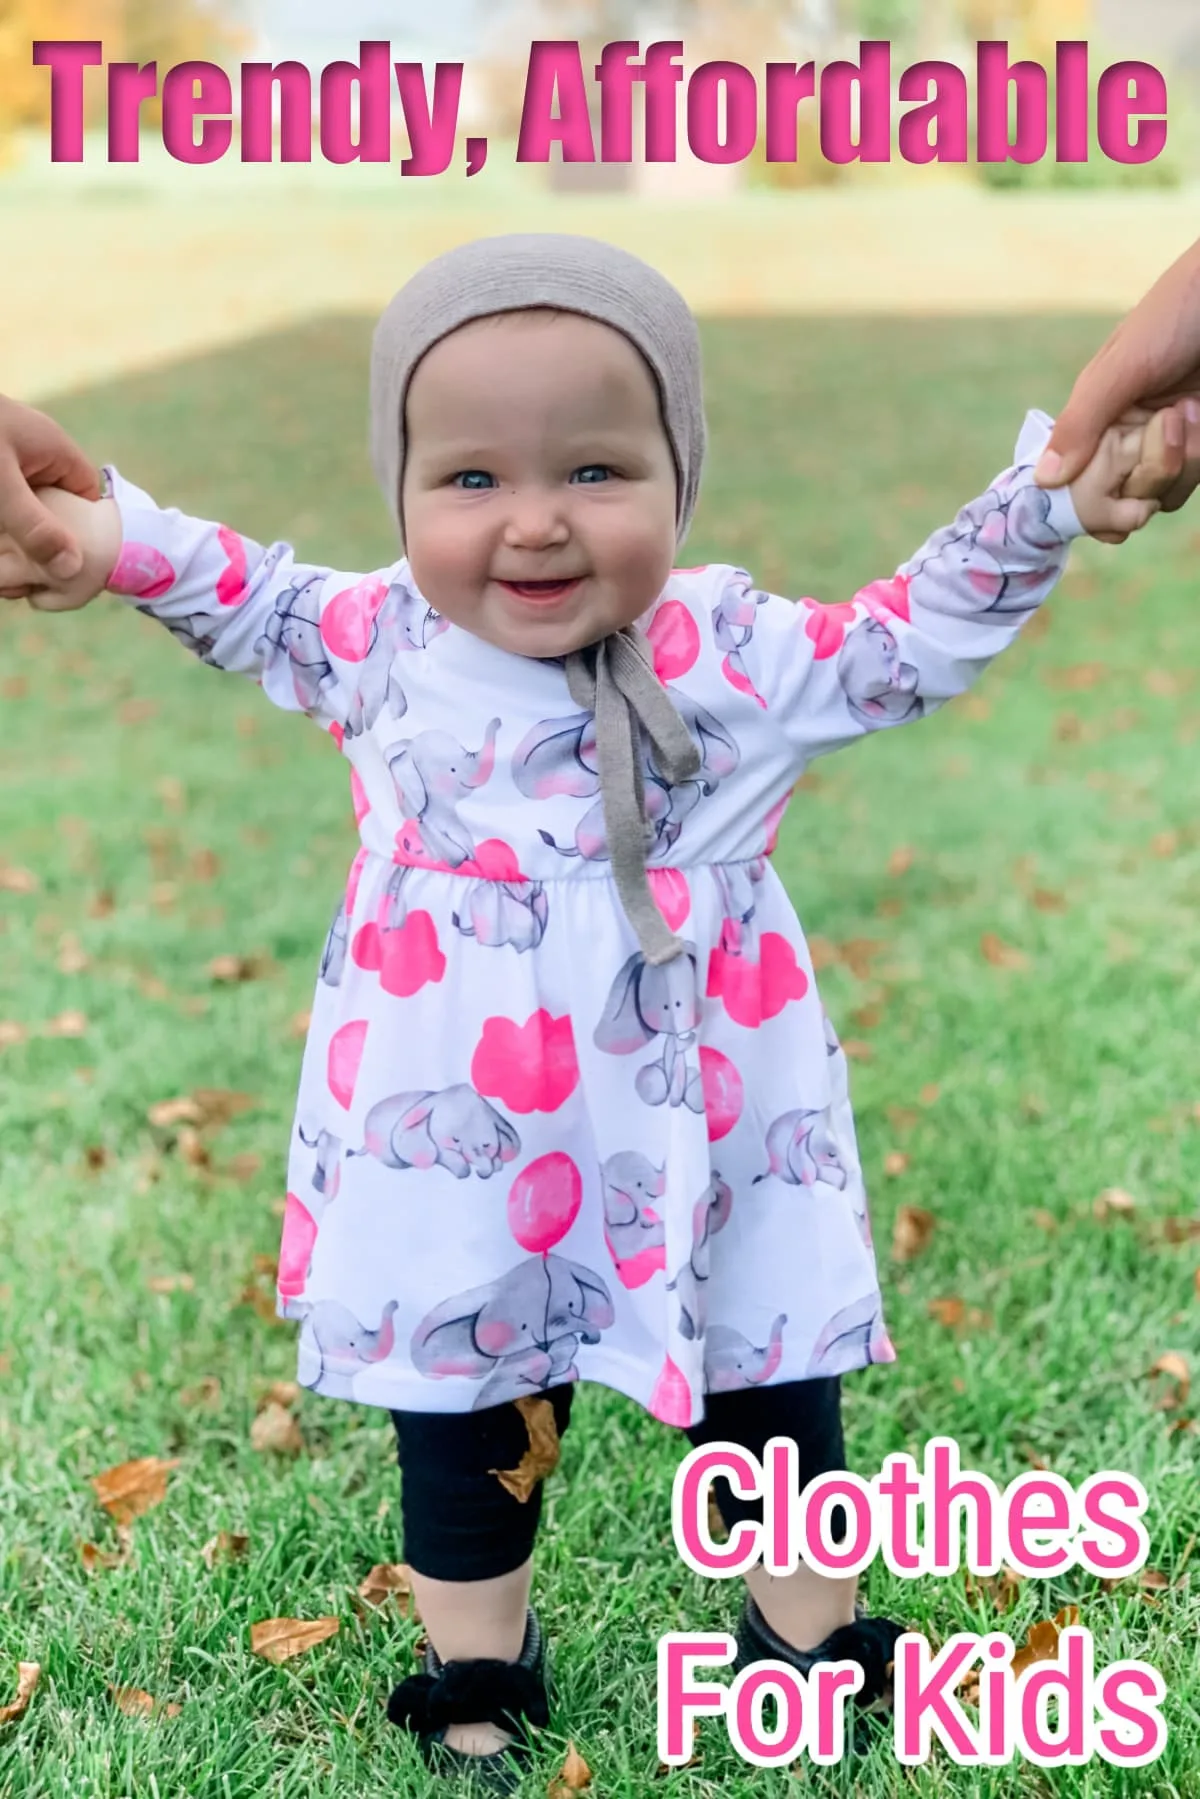 PatPat Review - Affordable Fashion Clothes For Kids!